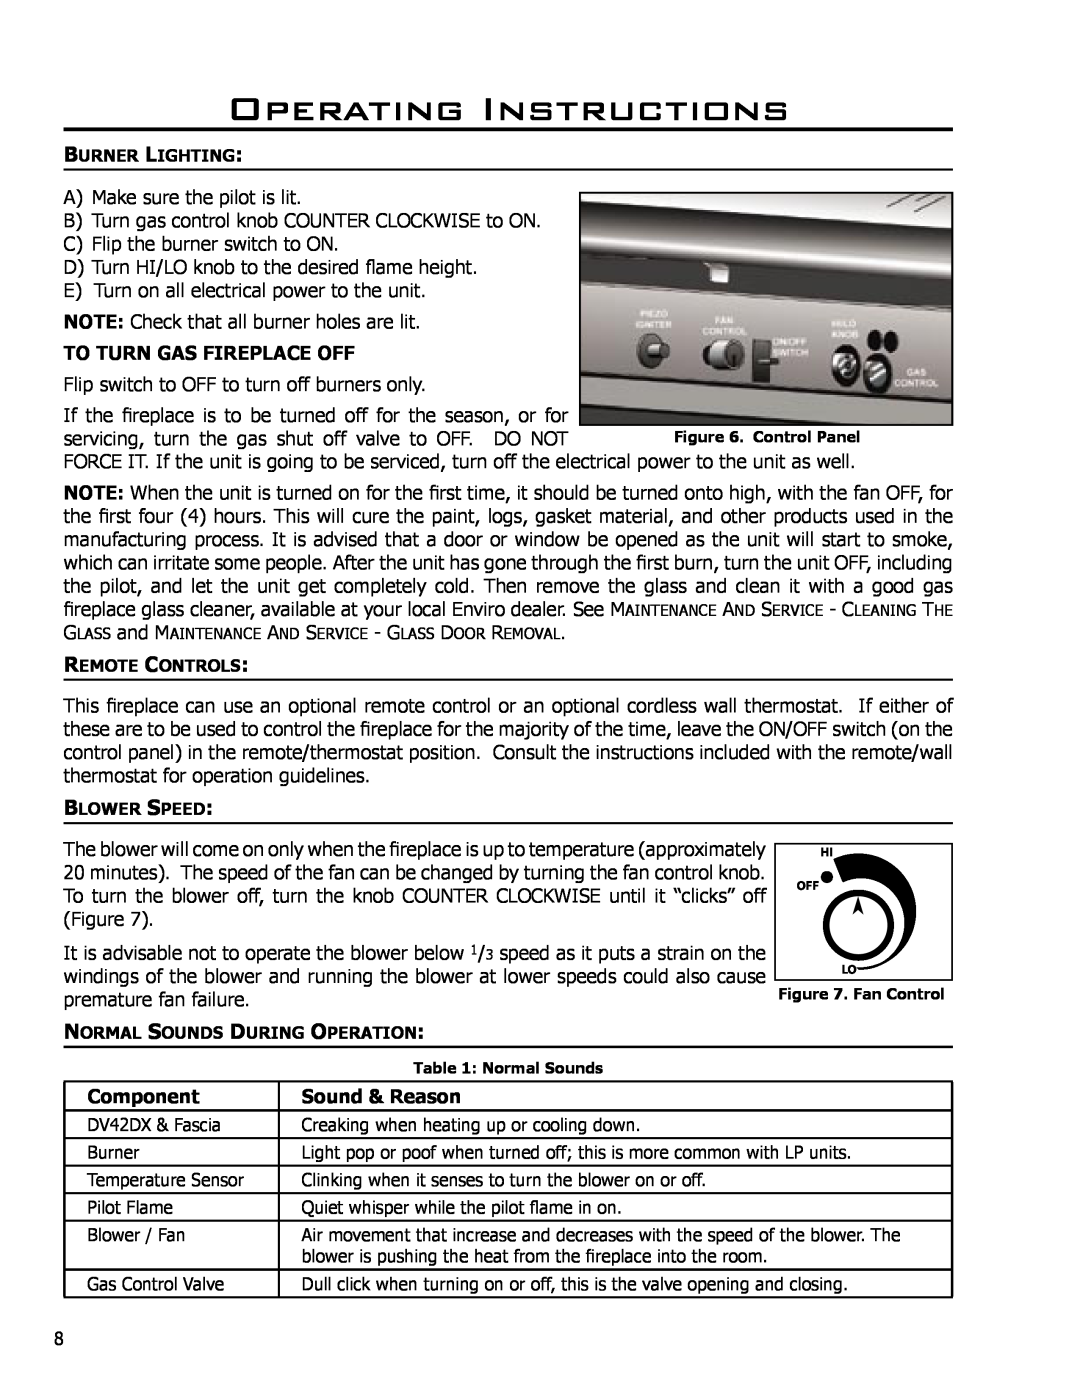 Enviro DV42DX owner manual Operating Instructions, To Turn Gas Fireplace Off, Component, Sound & Reason 